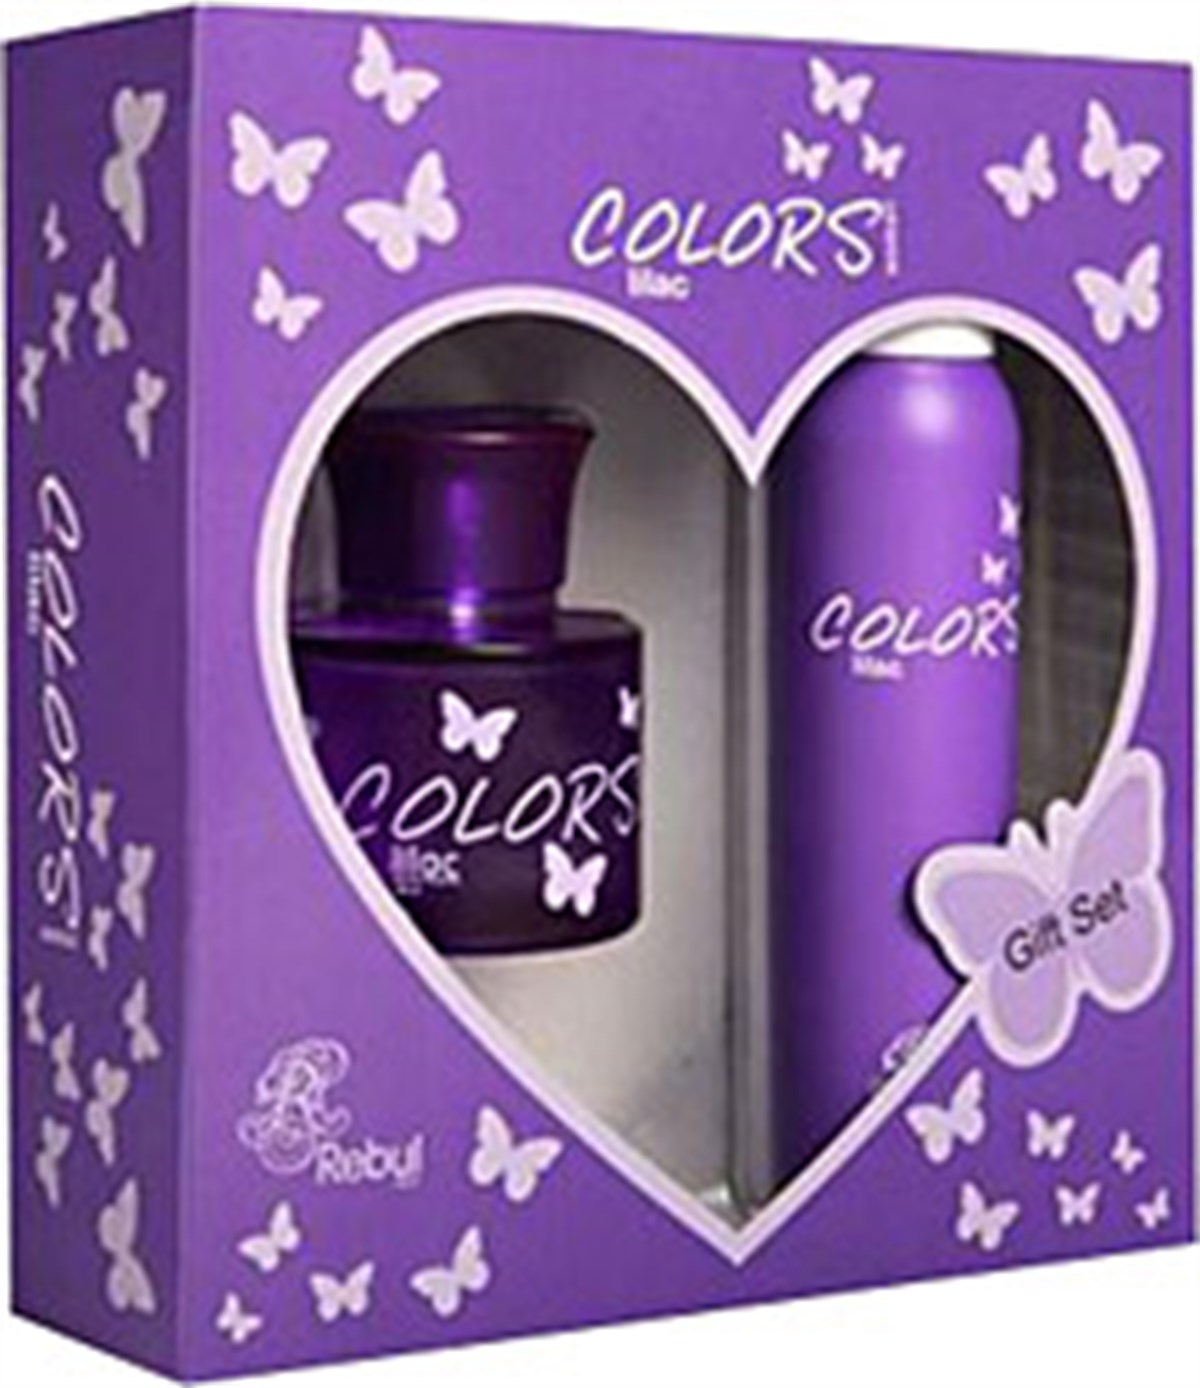 Rebul Kofre Edt 100 Ml Colors + 150 Ml Deodorant Lilac | Cossta Cosmetic  Station